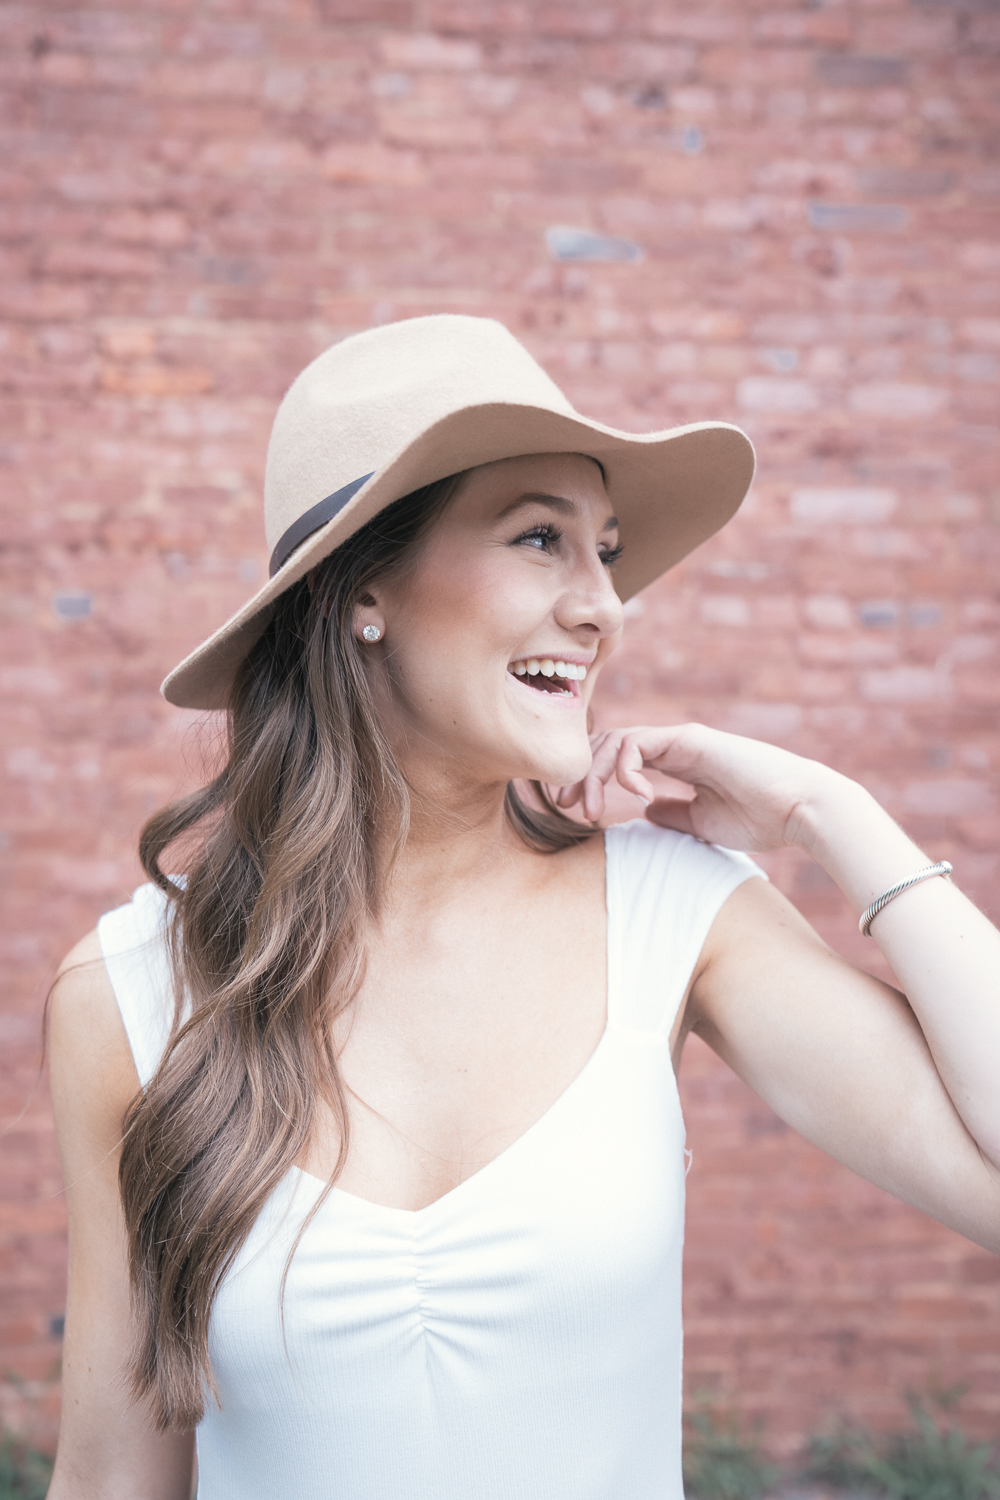 The Best Floppy Hat For Summer at the Honey Scoop, summer outfits, summer hat, summer outfits women, summer outfits 2019, summer hats for women, summer hats, summer hats outfit, floppy hat outfit summer, floppy hat outfit, floppy hat